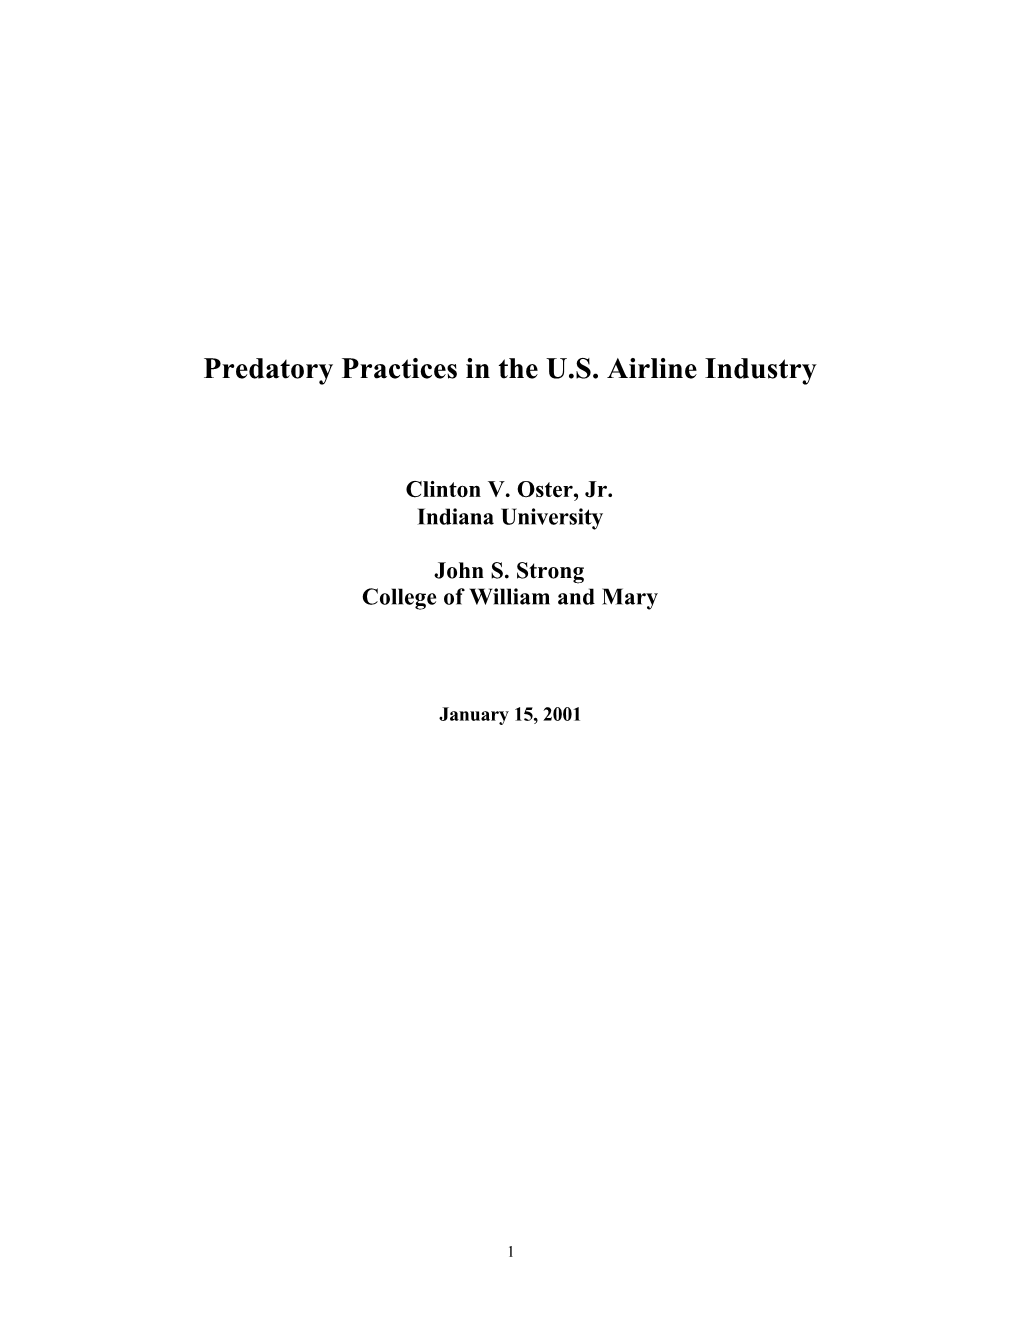 Predatory Practices in the U.S. Airline Industry